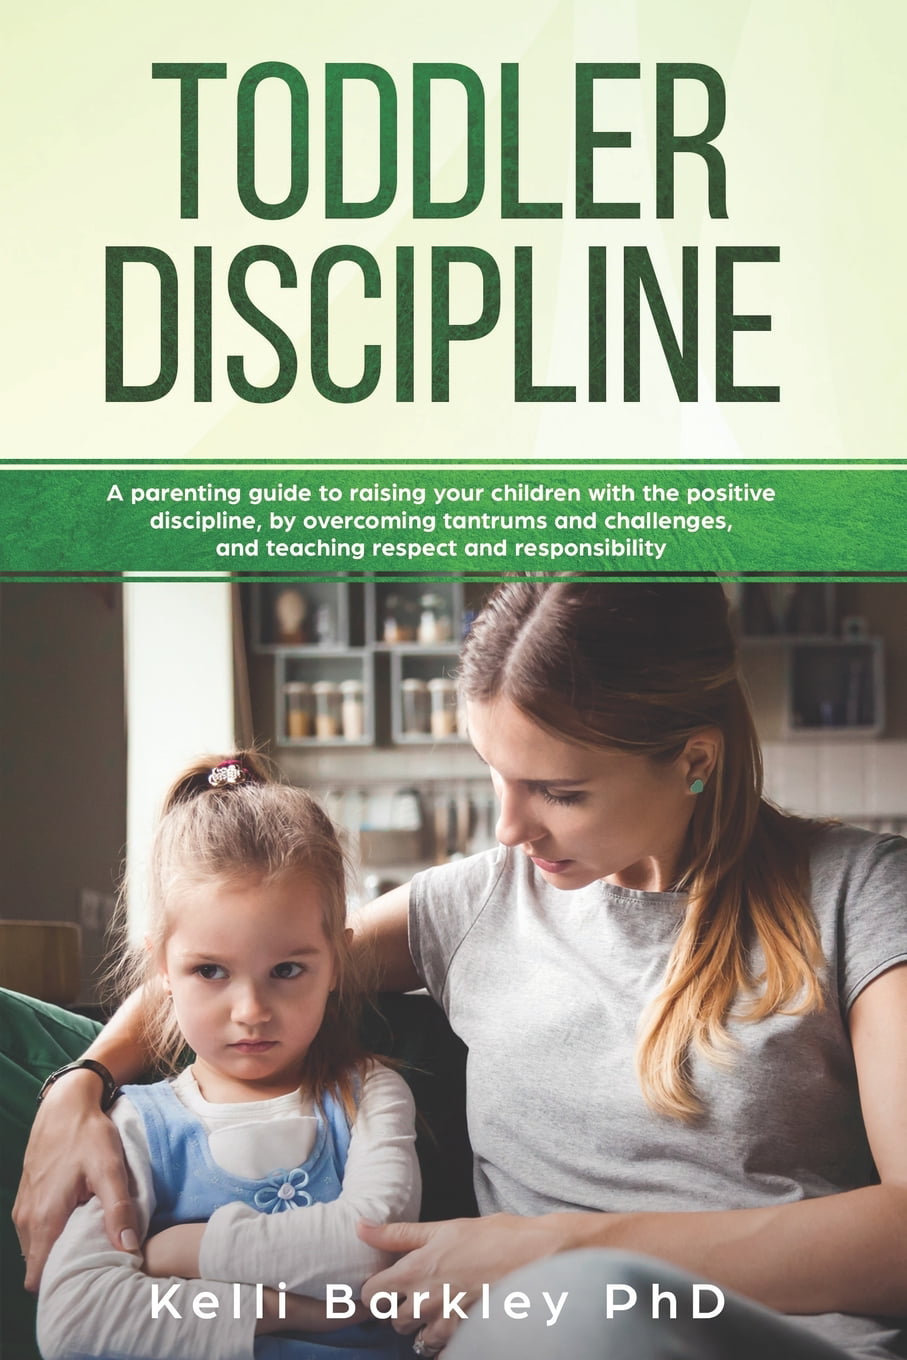 Toddler Discipline A Parenting Guide to Raising Your